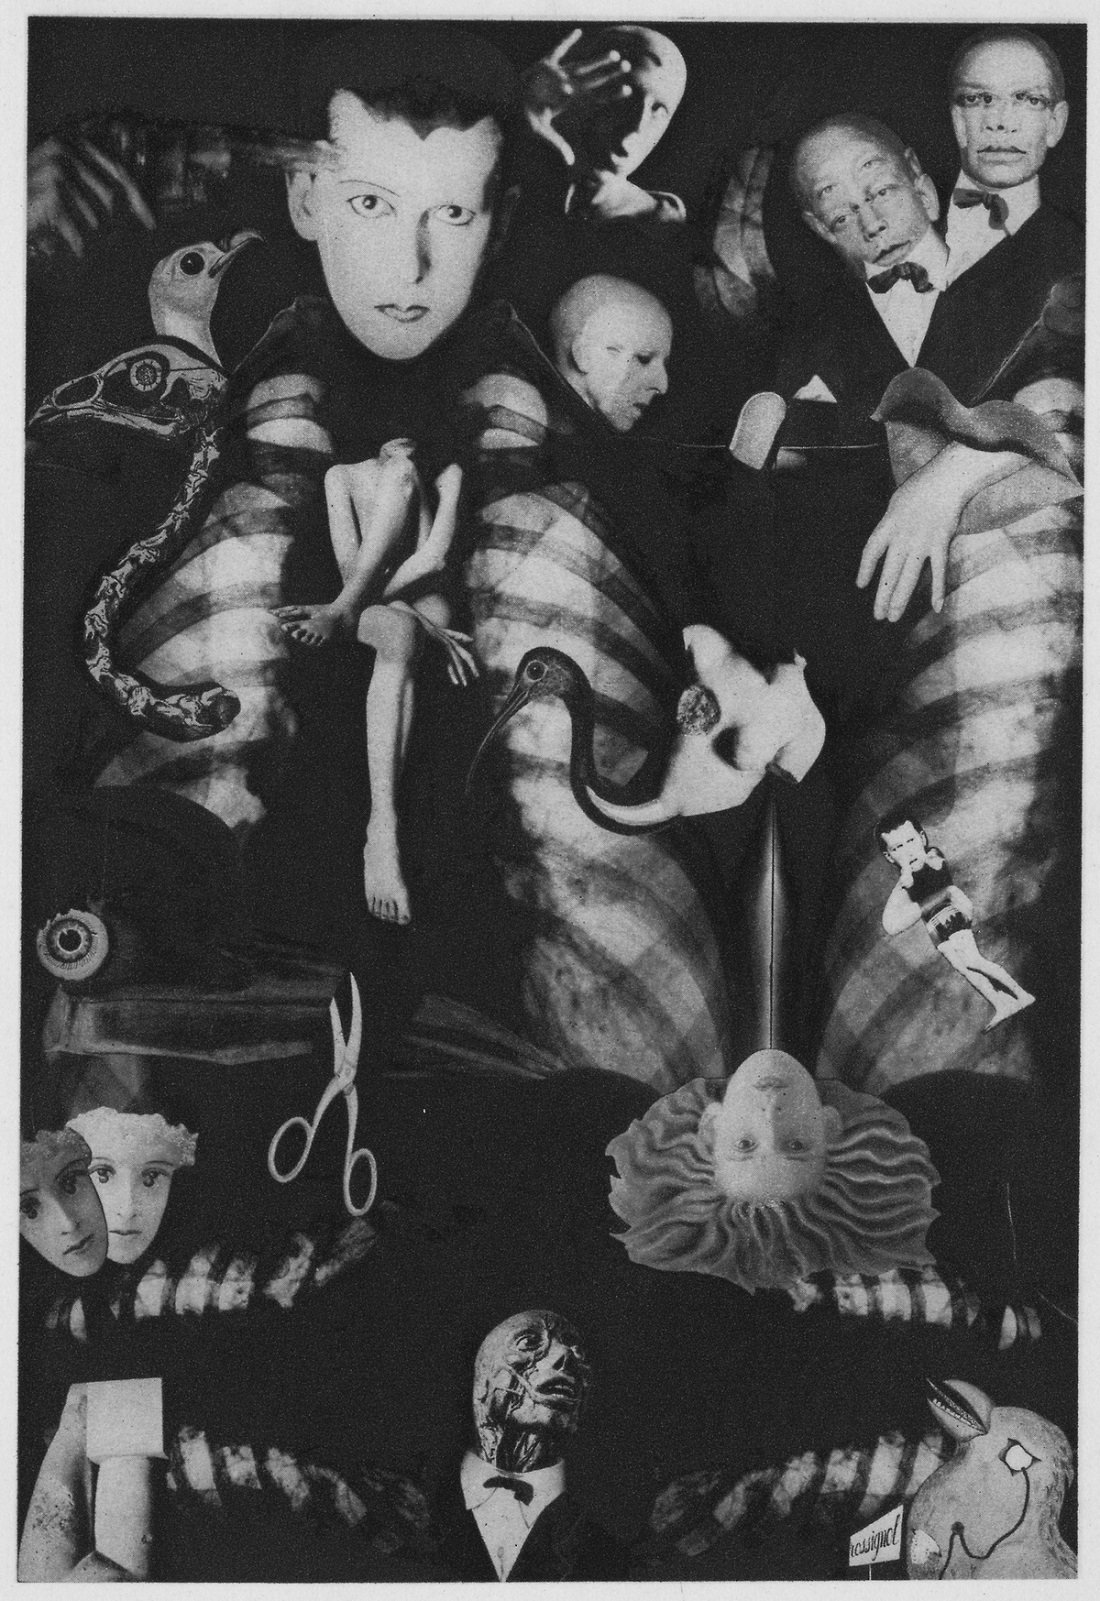 Claude Cahun, Aveux non Avenus, 1929-30. Private Collection Alberta Pane _ Patrice Garnier. All rights reserved